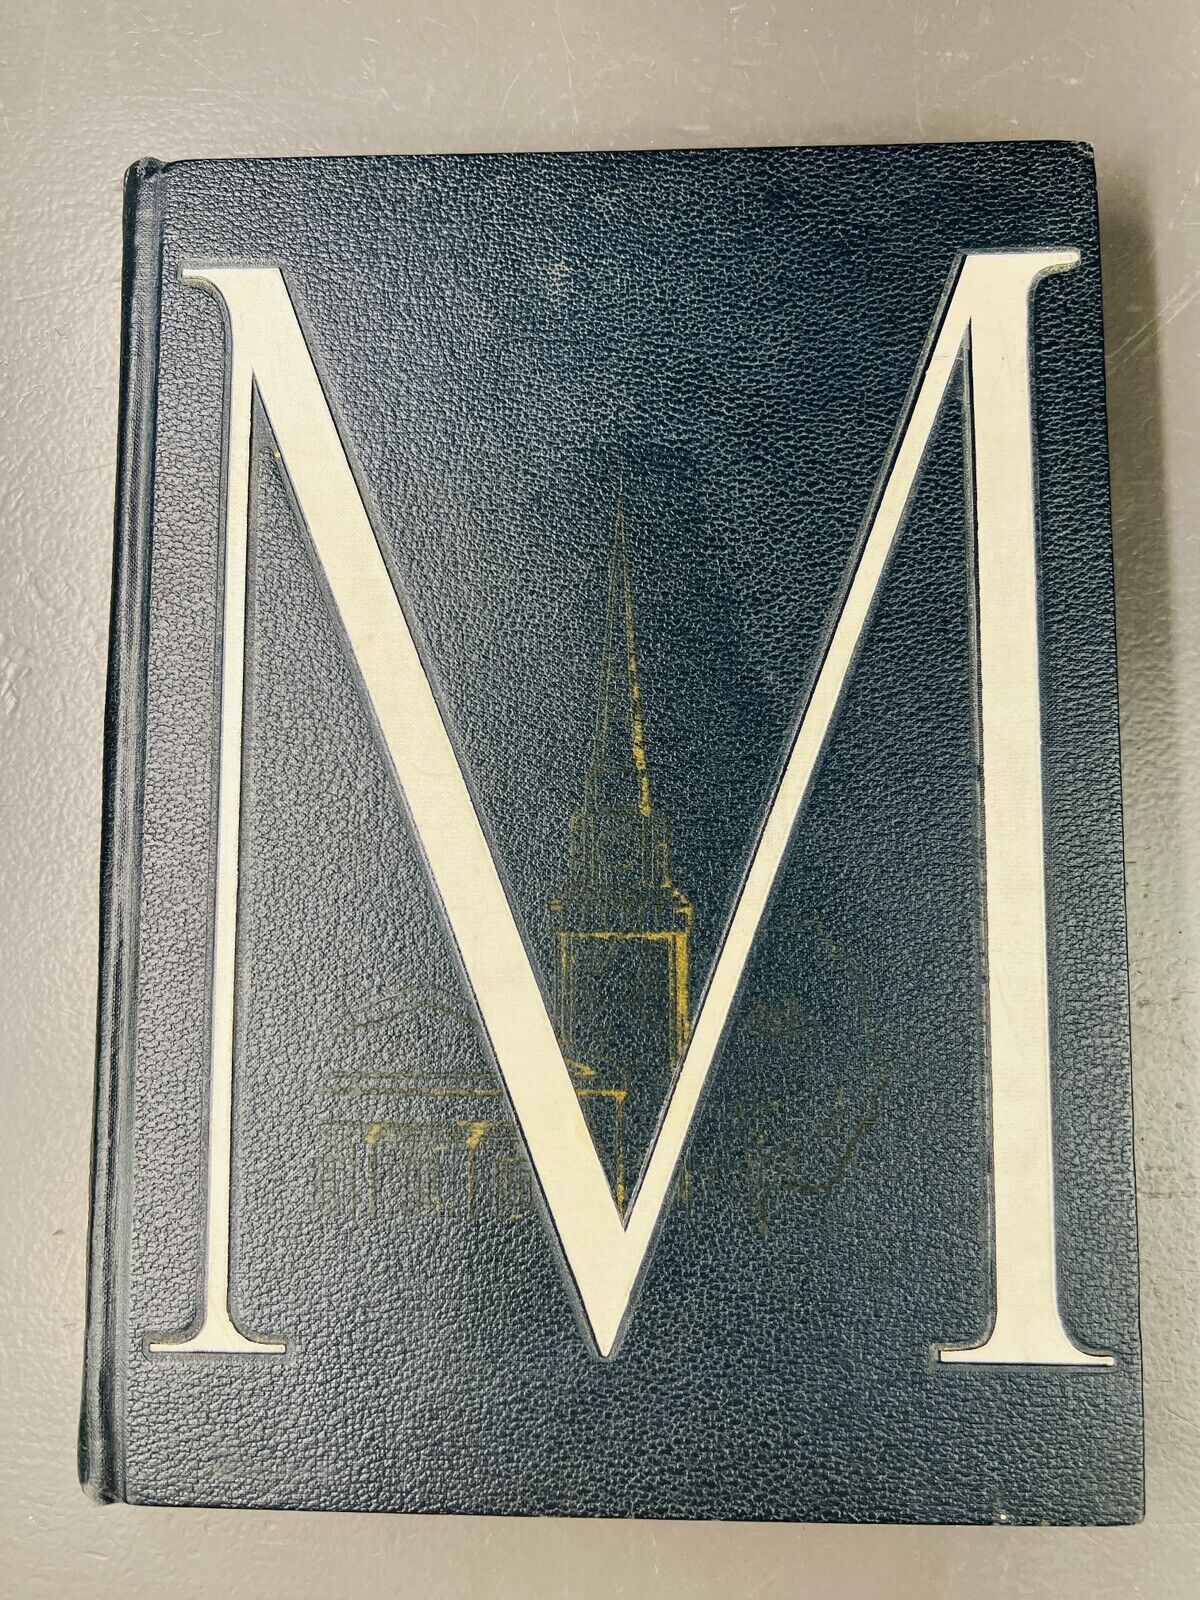 Yearbook Annual The McCallie School 1962 Chattanooga TN Foundations Pennant